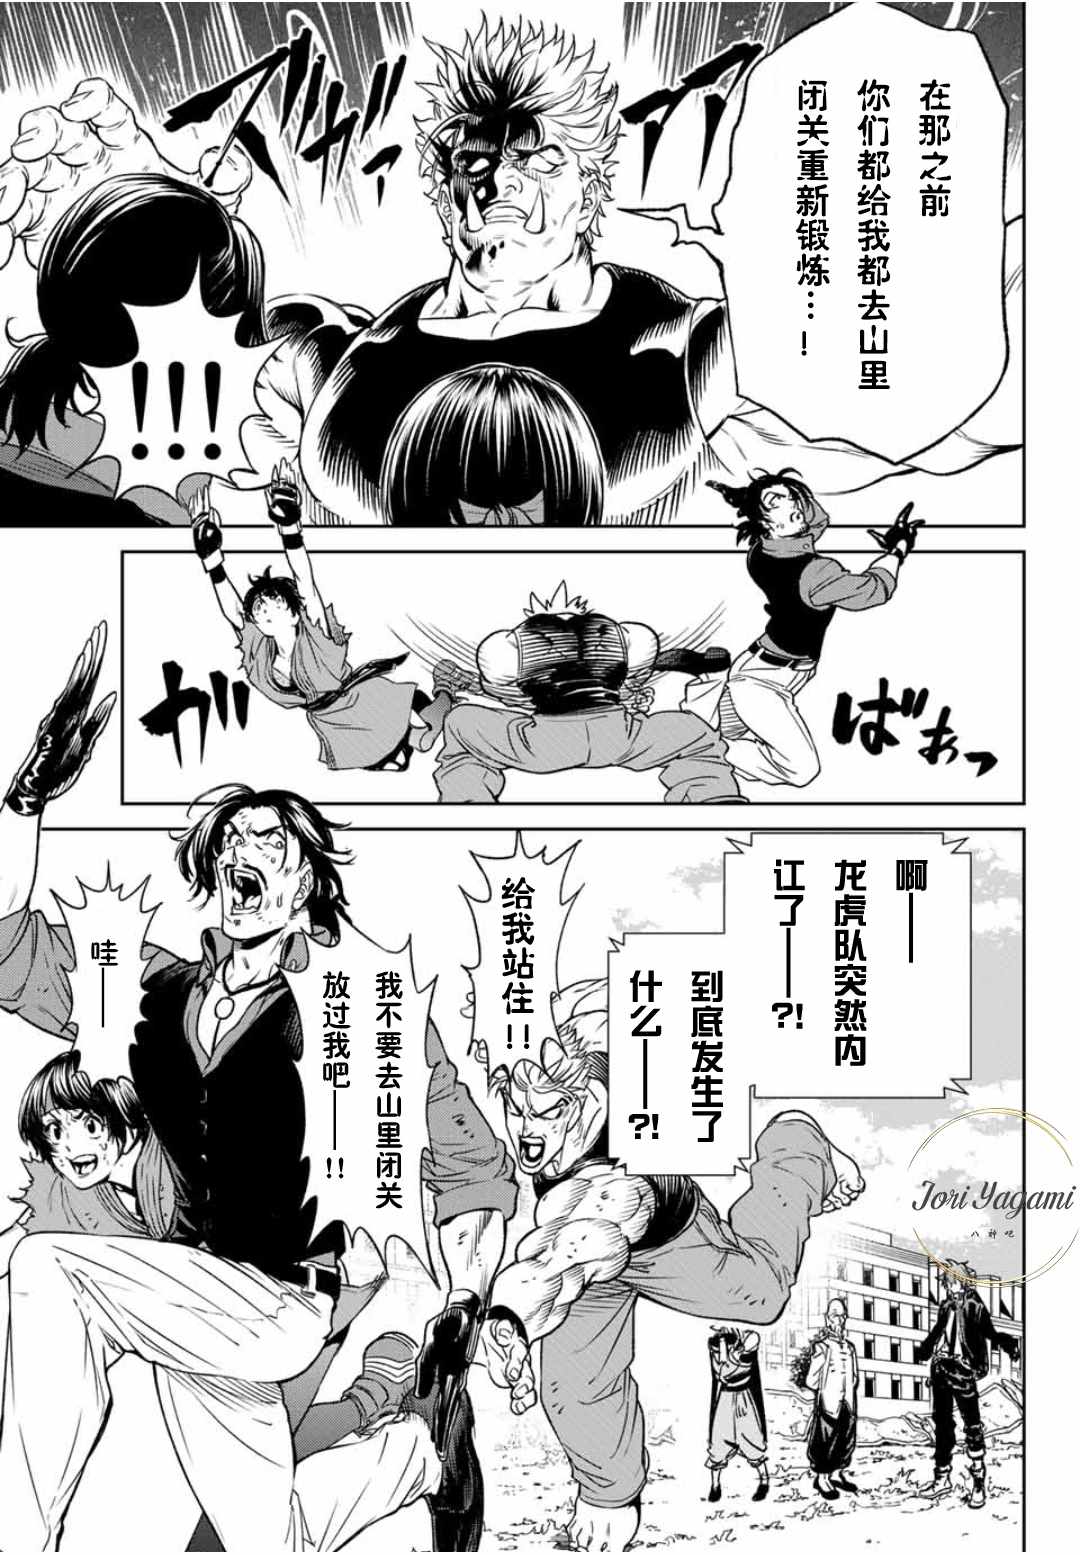 《THE KING OF FIGHTERS～A NEW BEGINNING～》漫画 ANEWBEGINNING 028话